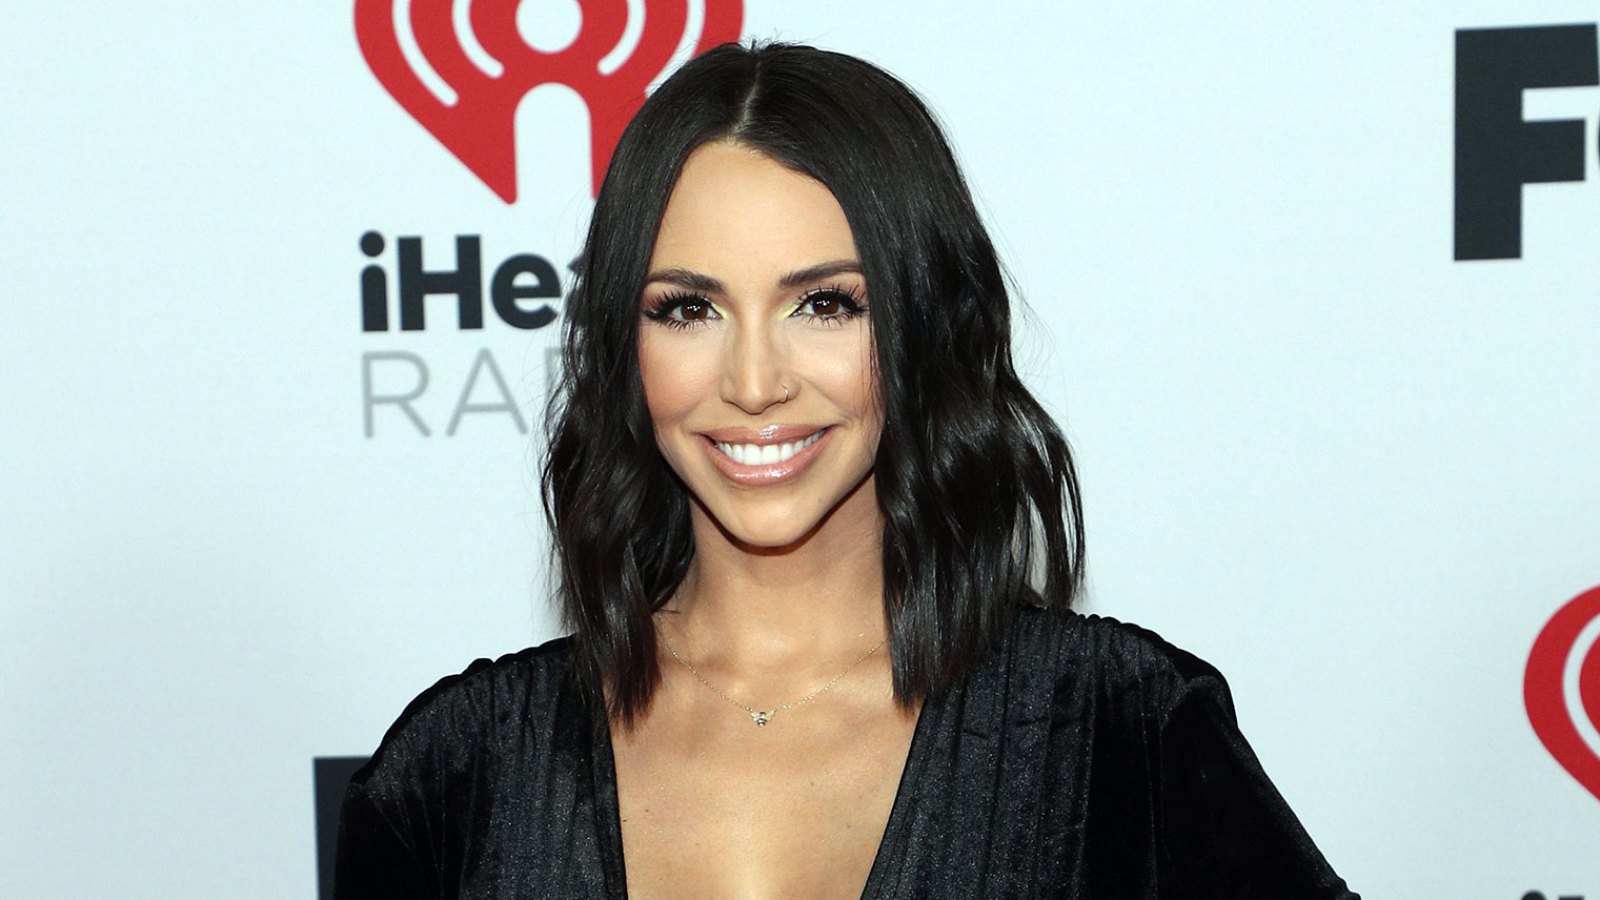 Scheana Shay's Biggest Insecurity Is No Match for This 60 Scalp Foundation